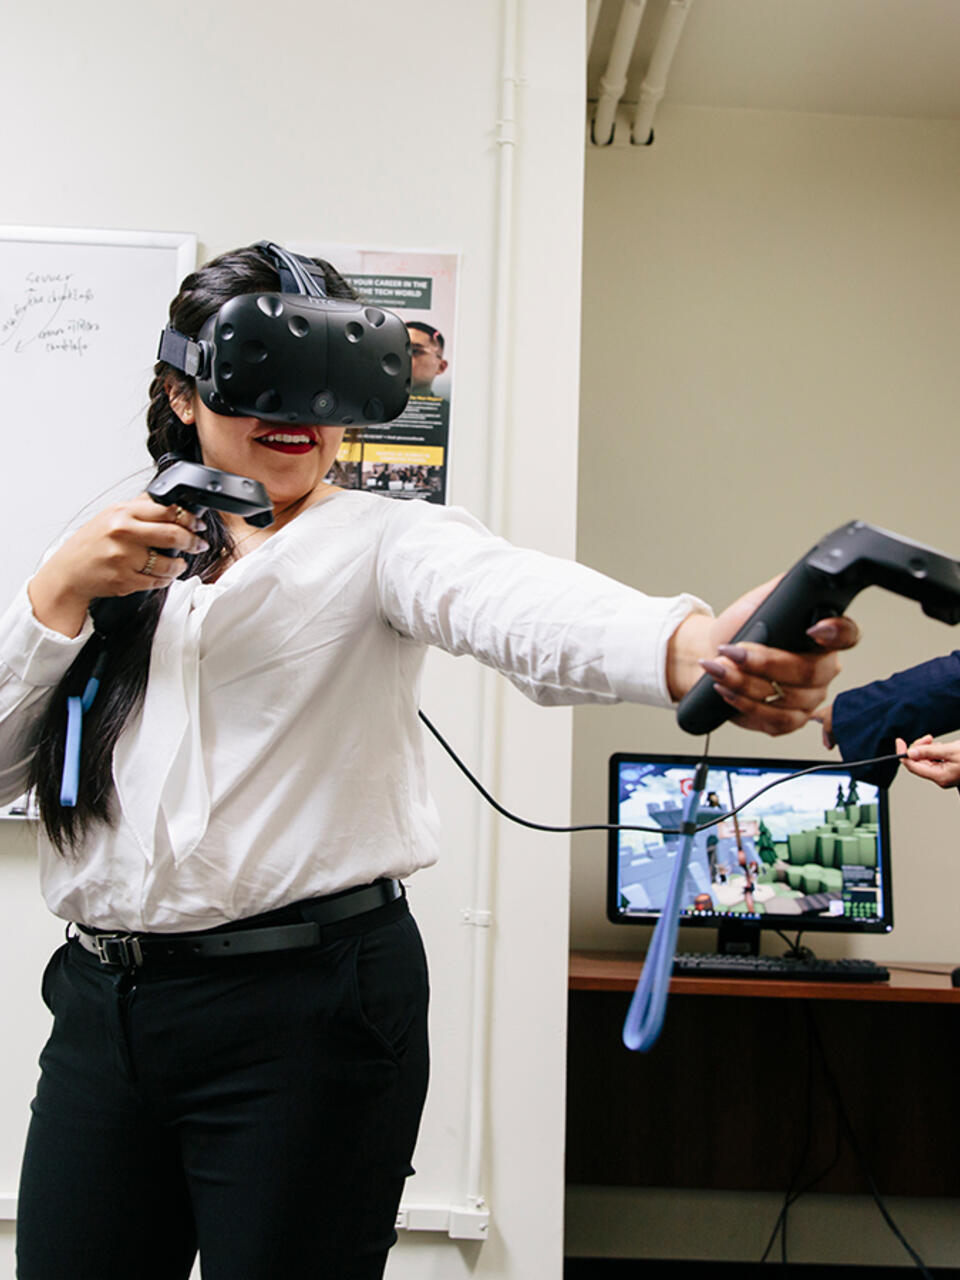 Student using VR equipment in class